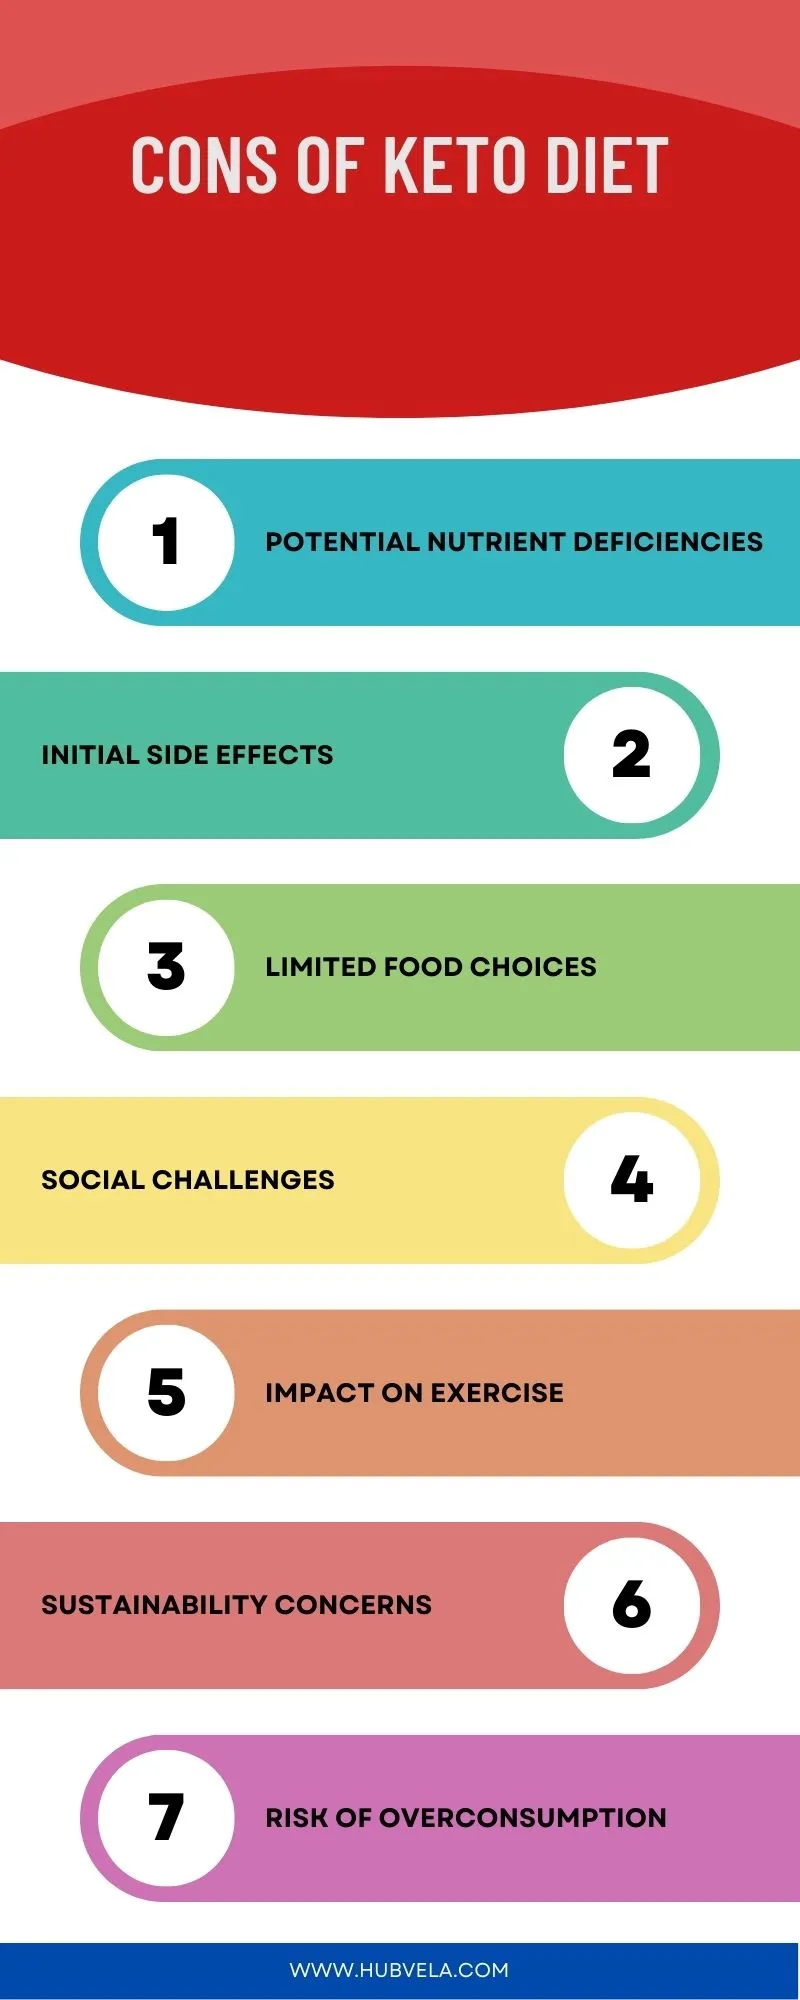 Cons of Keto Diet Infographic